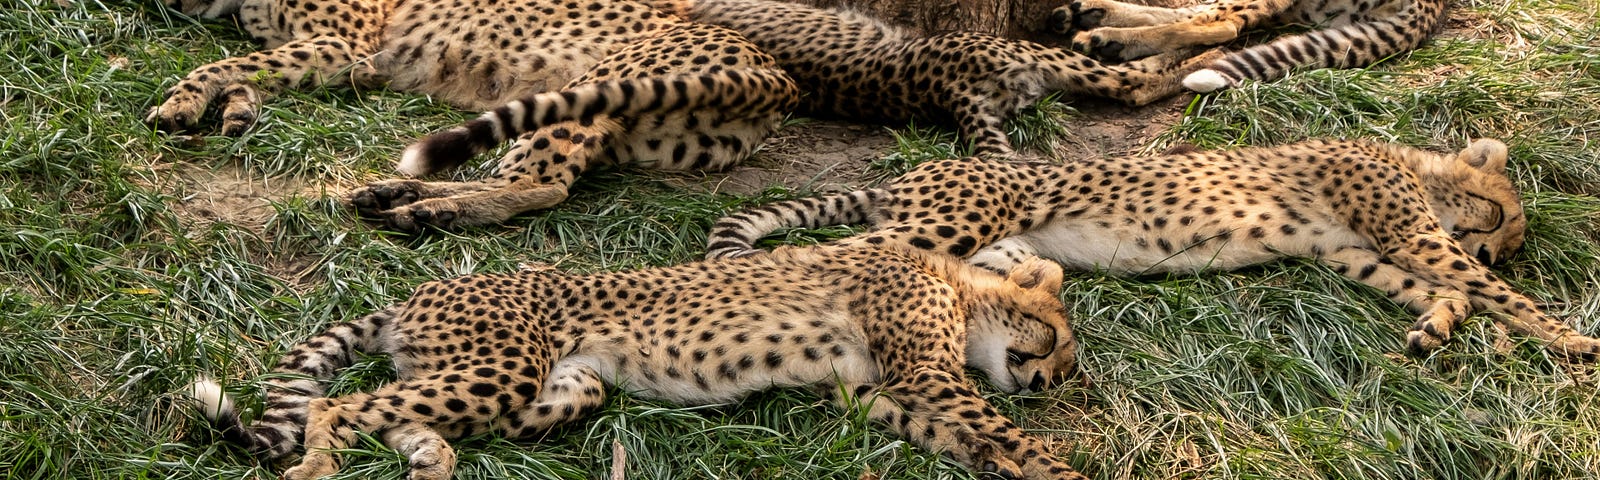 Six Cheetahs lay sleeping in green grass around a large tree trunk.